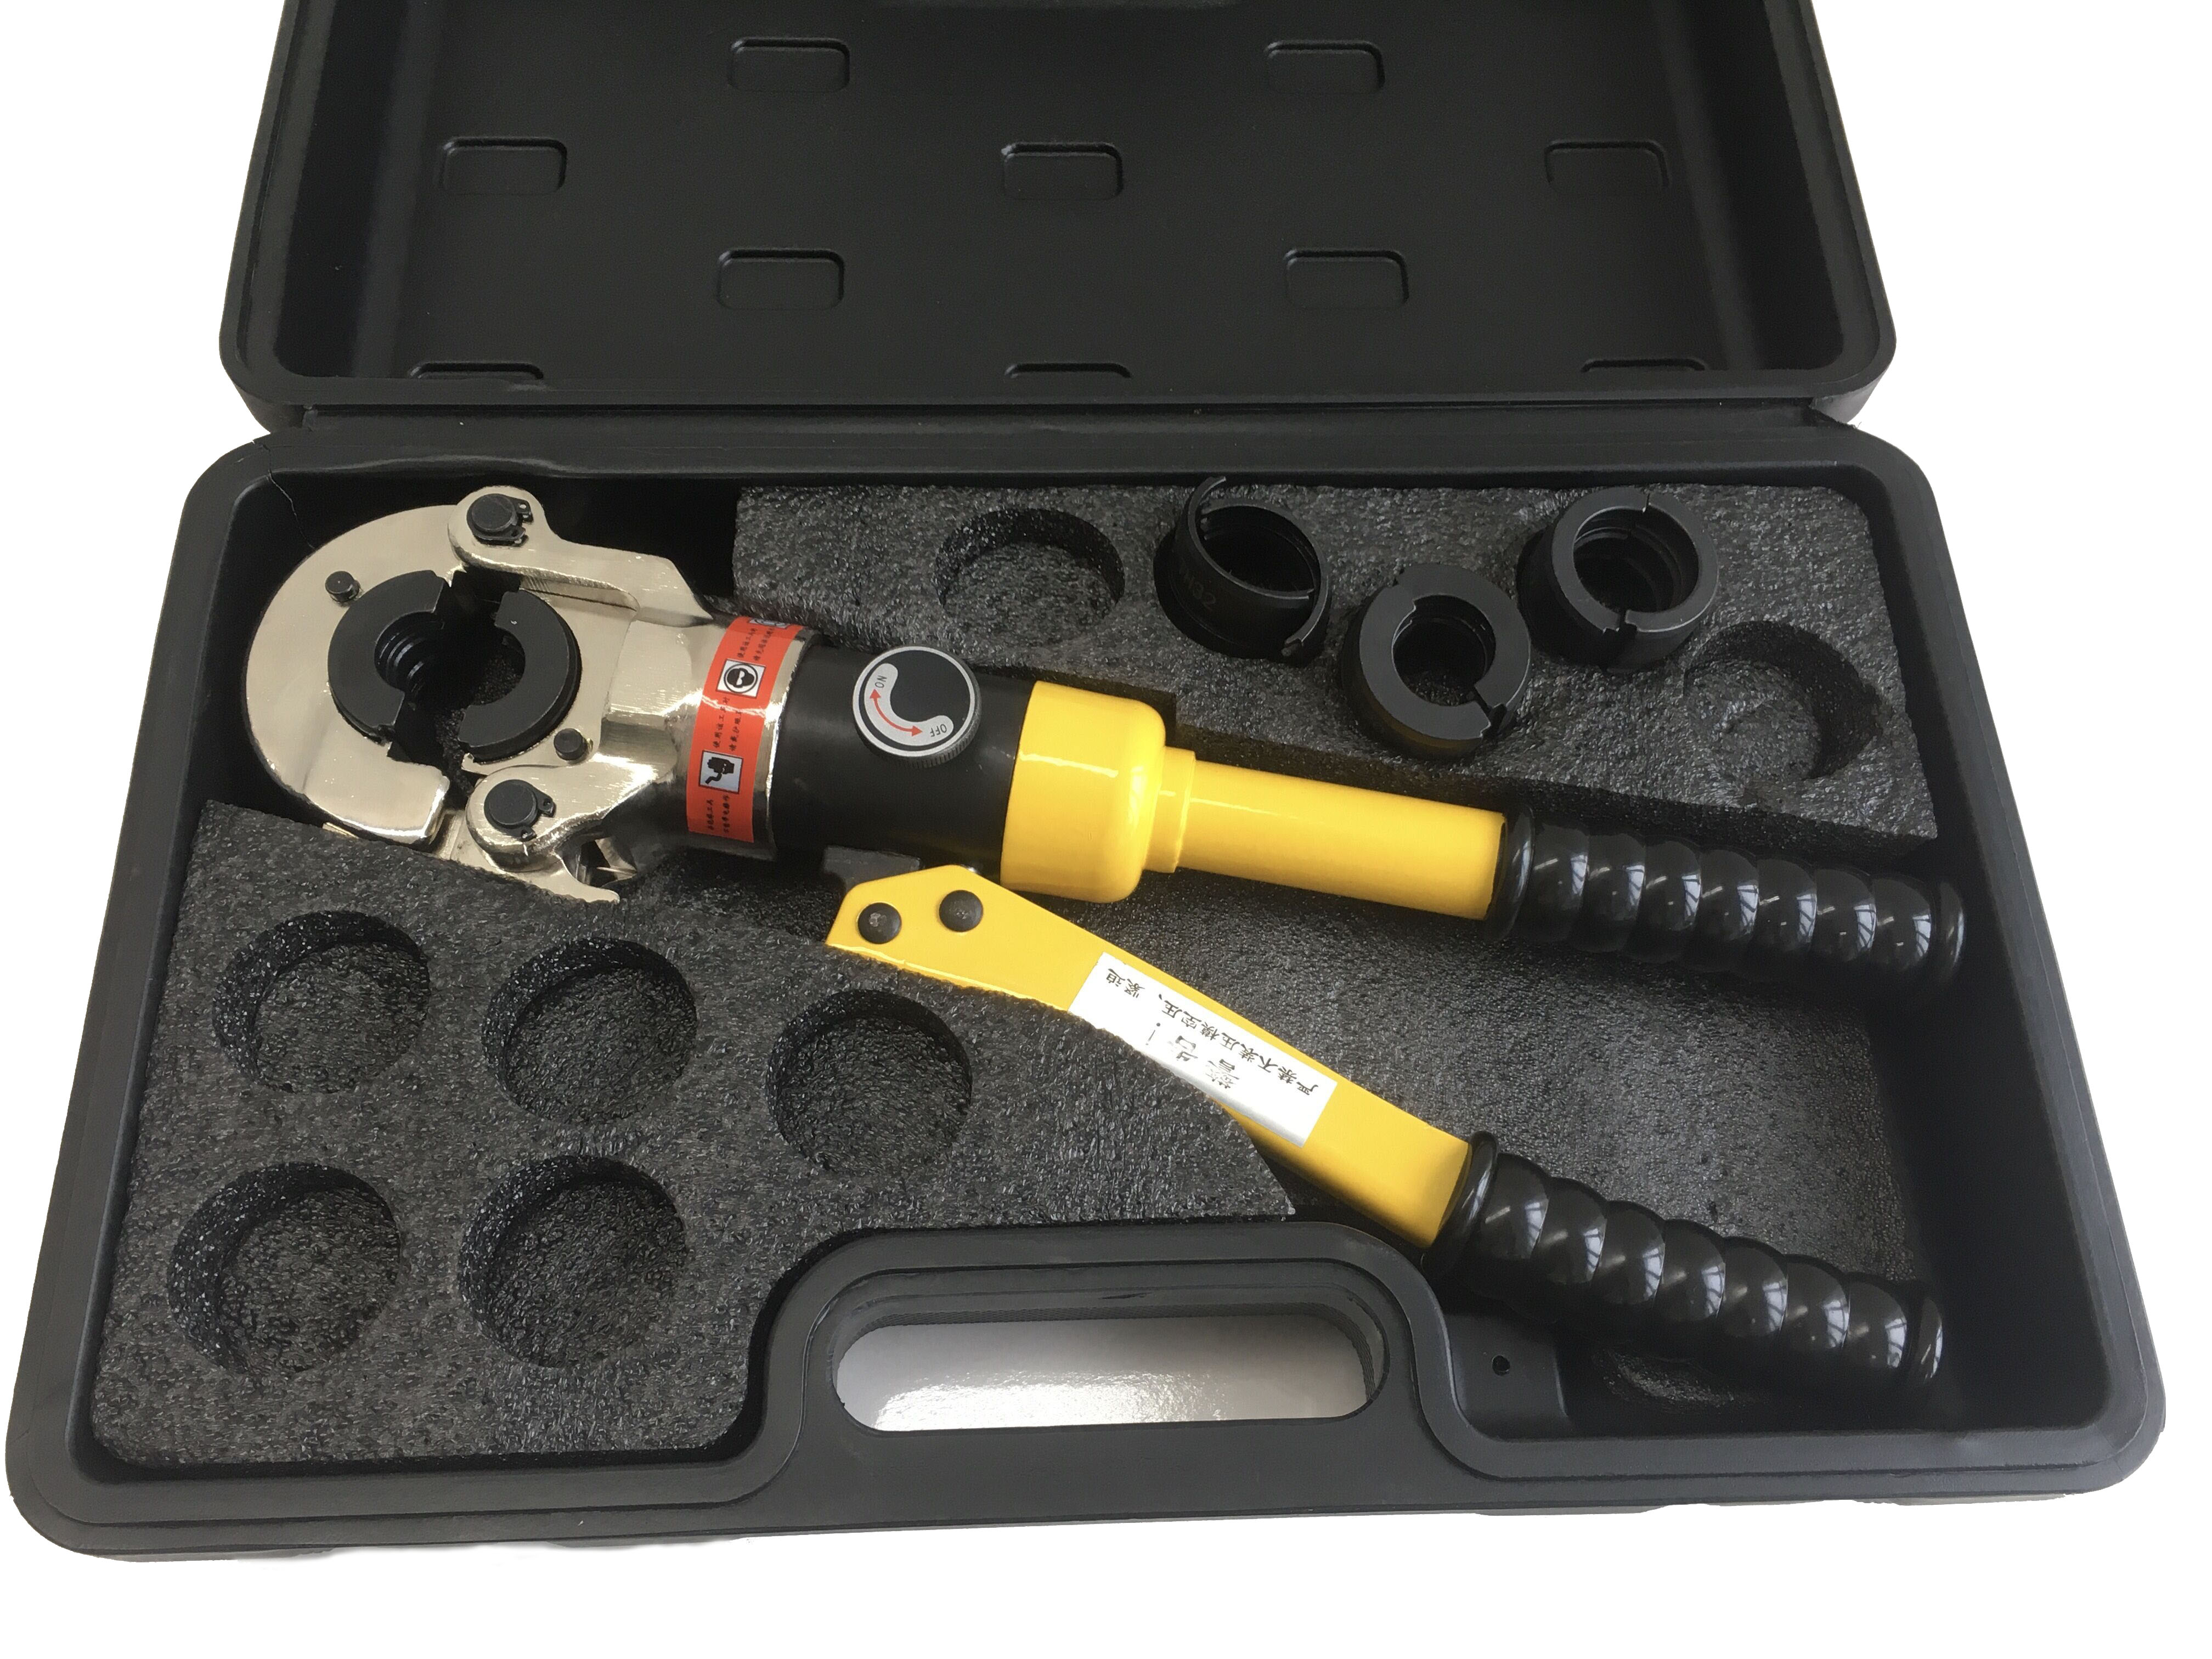 Hydraulic Pipe Crimping Tools Pex Pressing Tools With TH jaws 16-32mm GC-1632